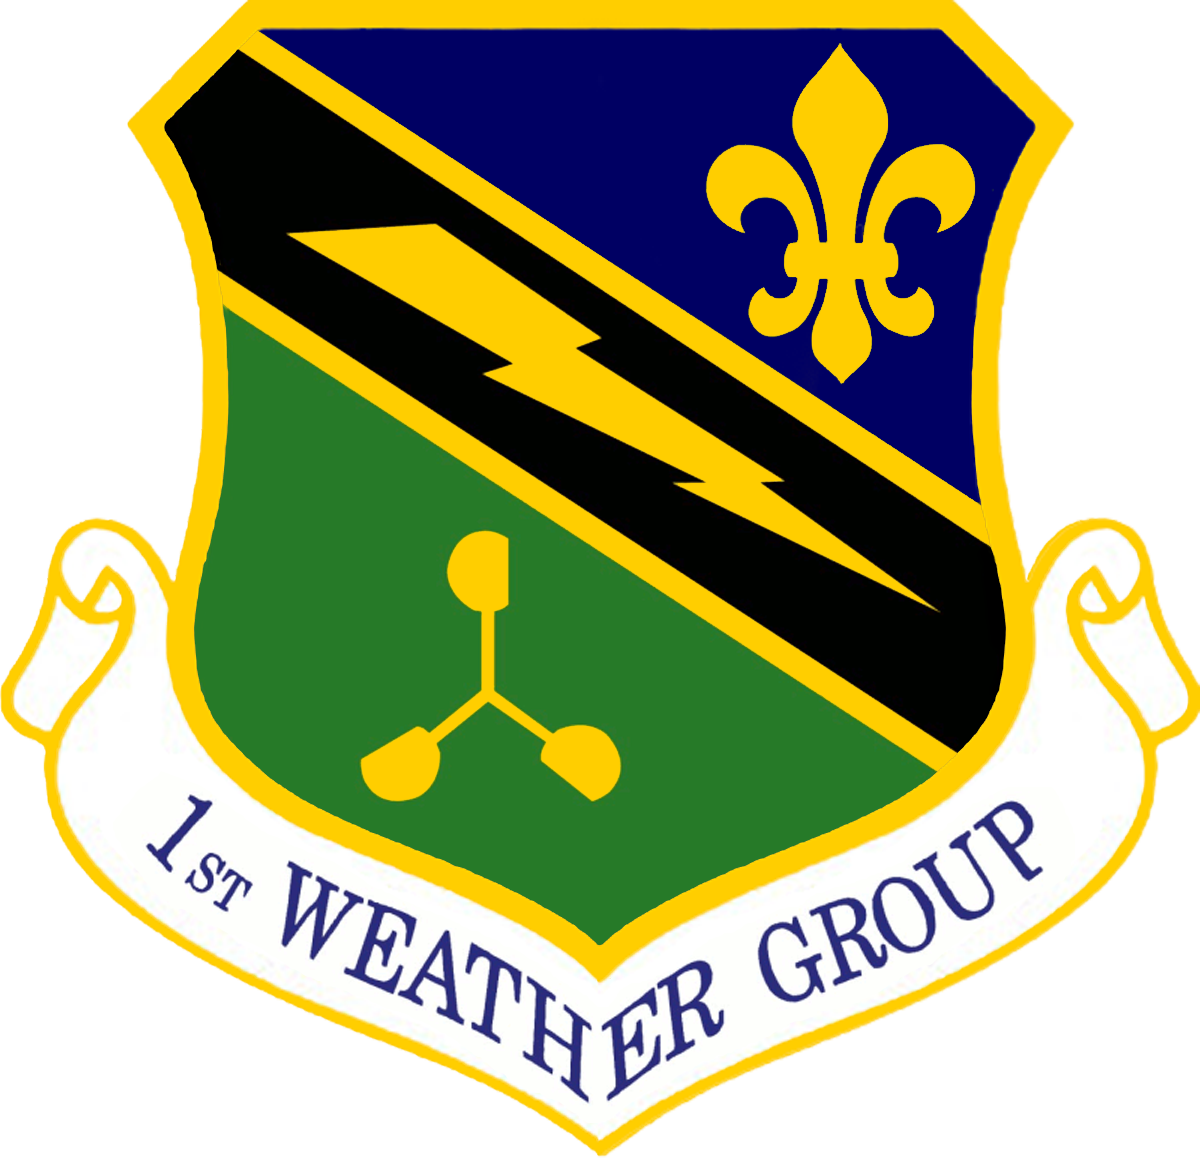 1st Weather Group - 633 Medical Group (1200x1158)